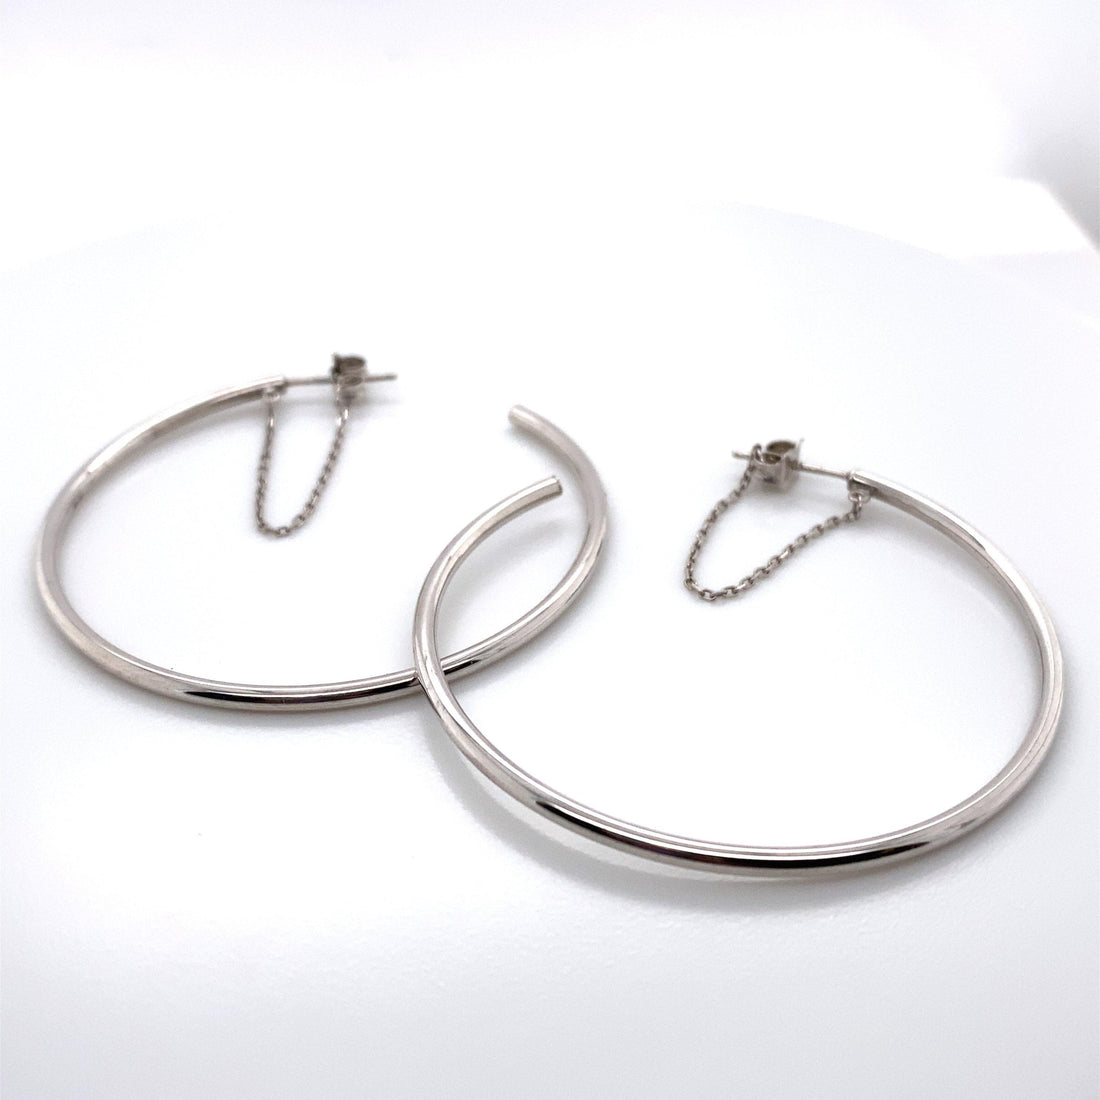 SILVER LARGE HOOP WITH SAFETY CHAIN EARRINGS - Appelt&